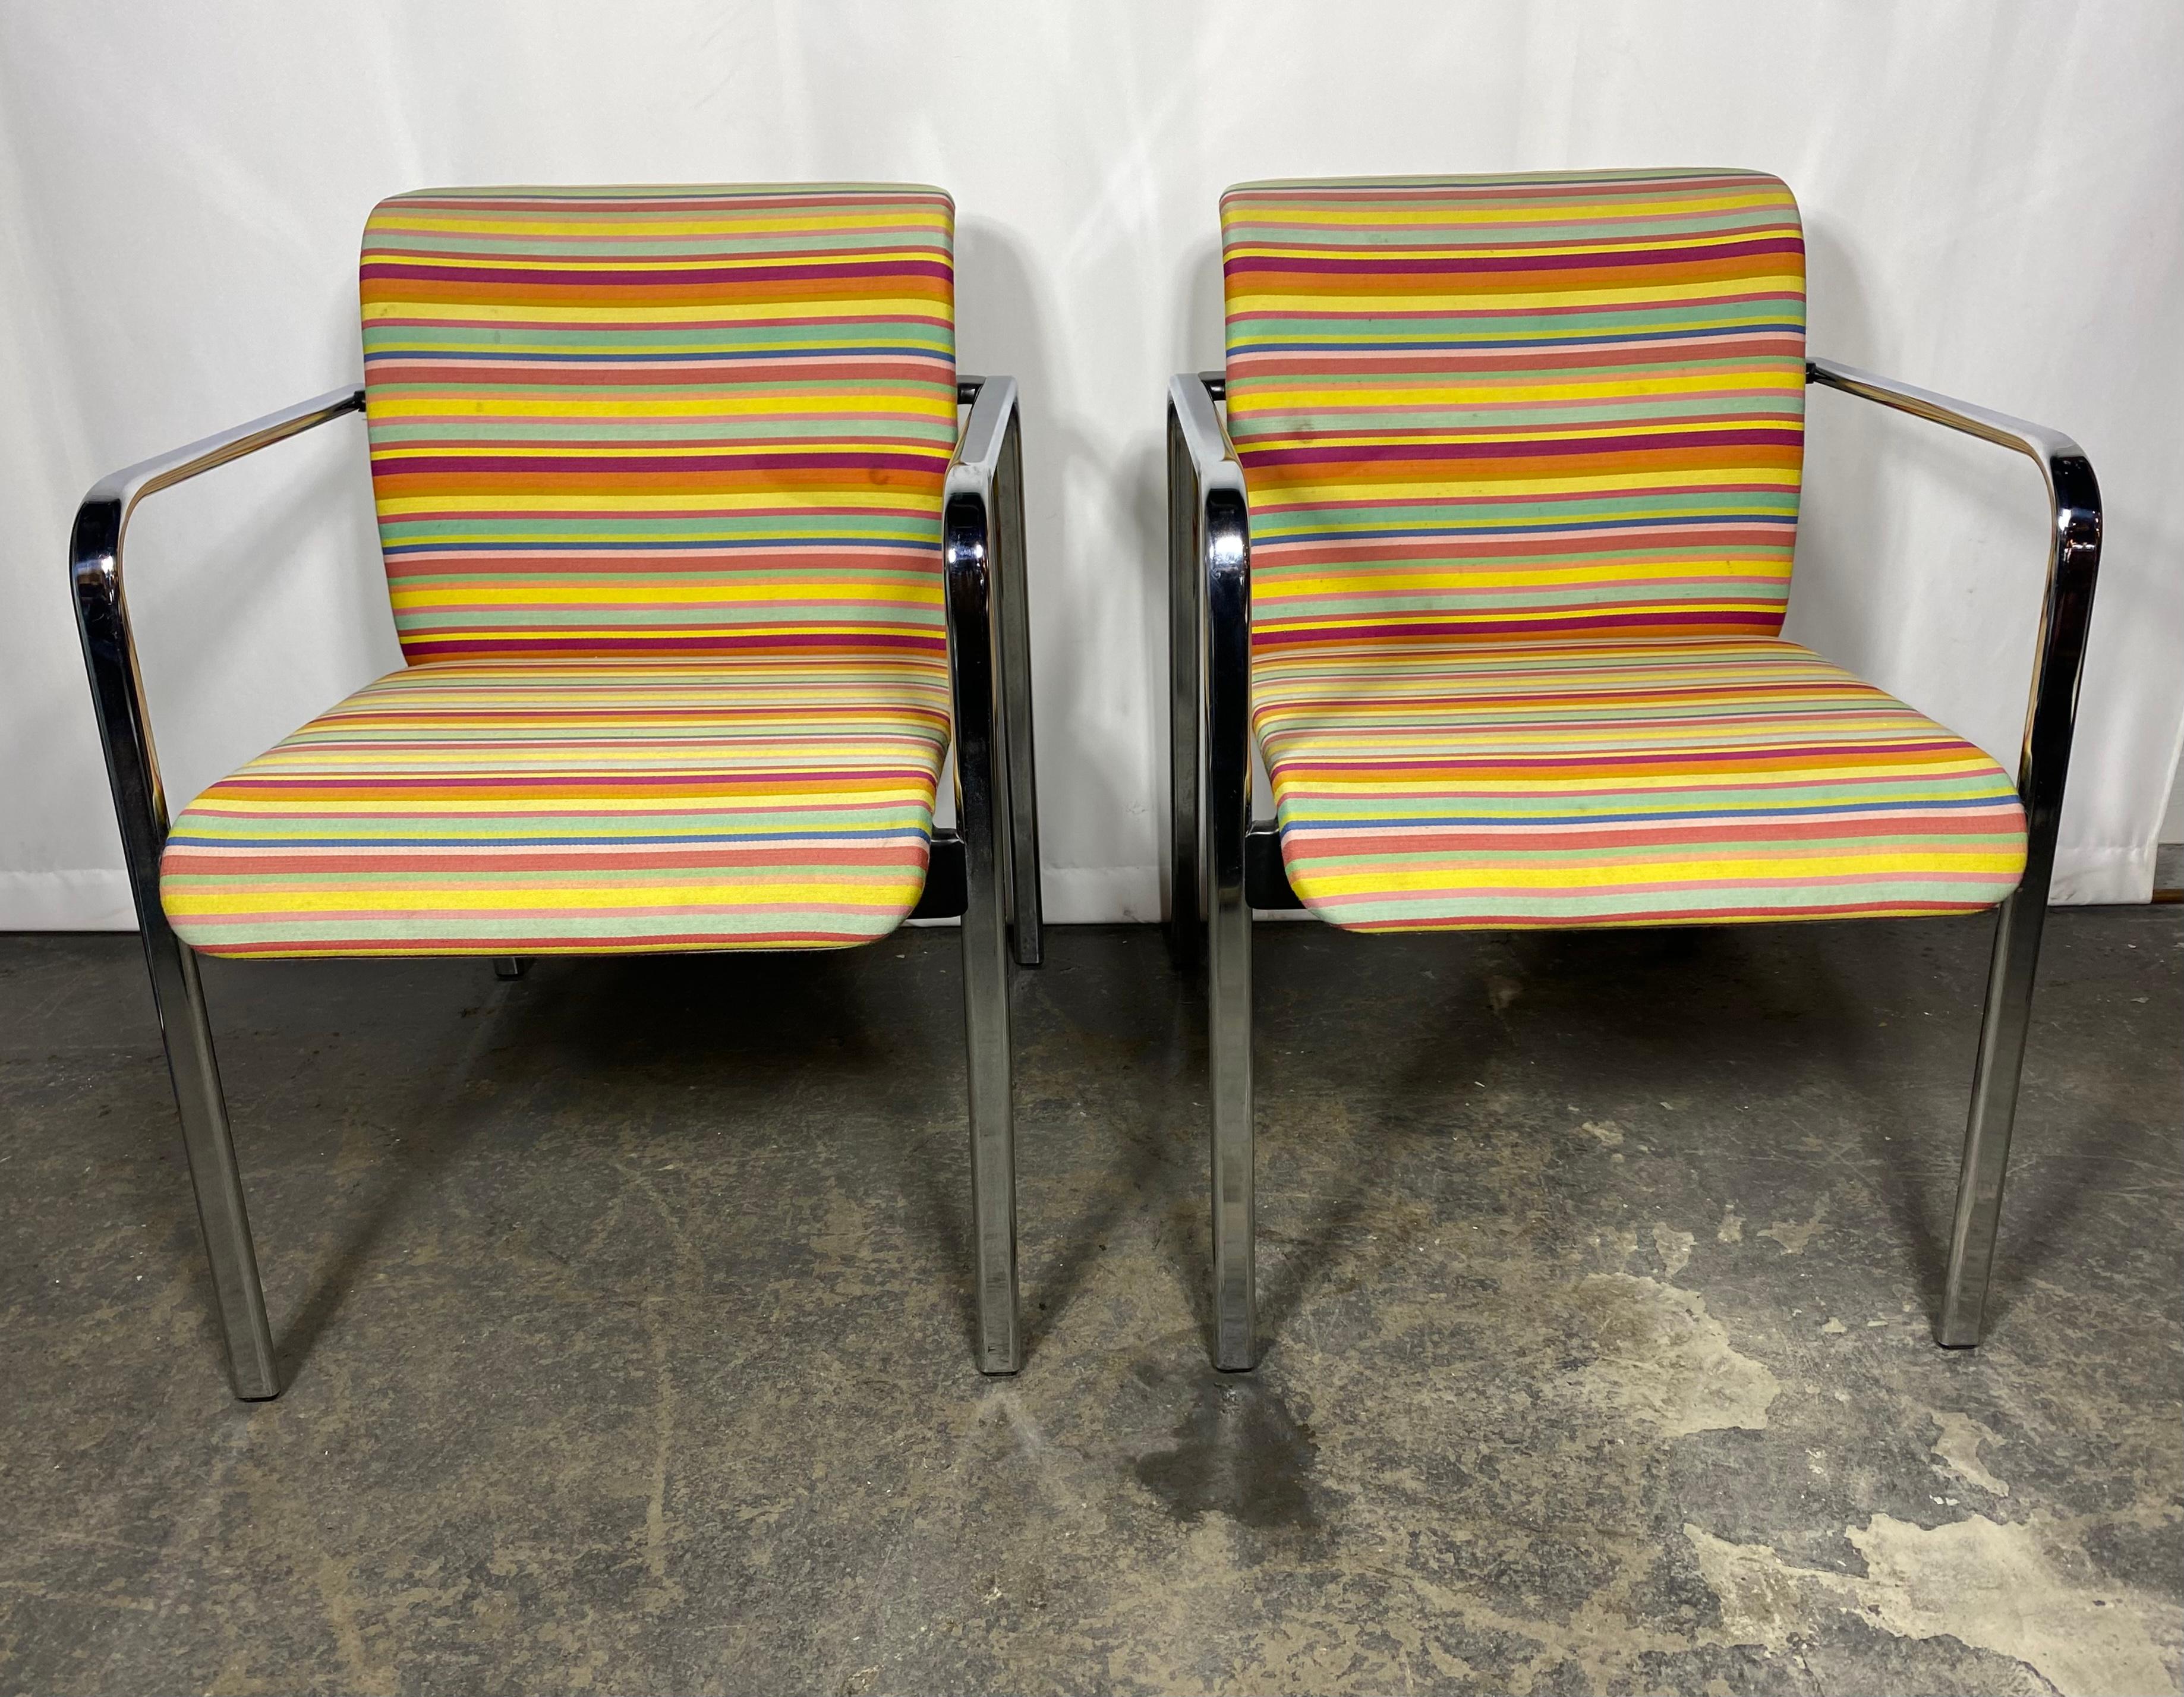 Modernist Alexander Girard Fabric Chairs by Peter Protzmann for Herman Miller In Good Condition For Sale In Buffalo, NY